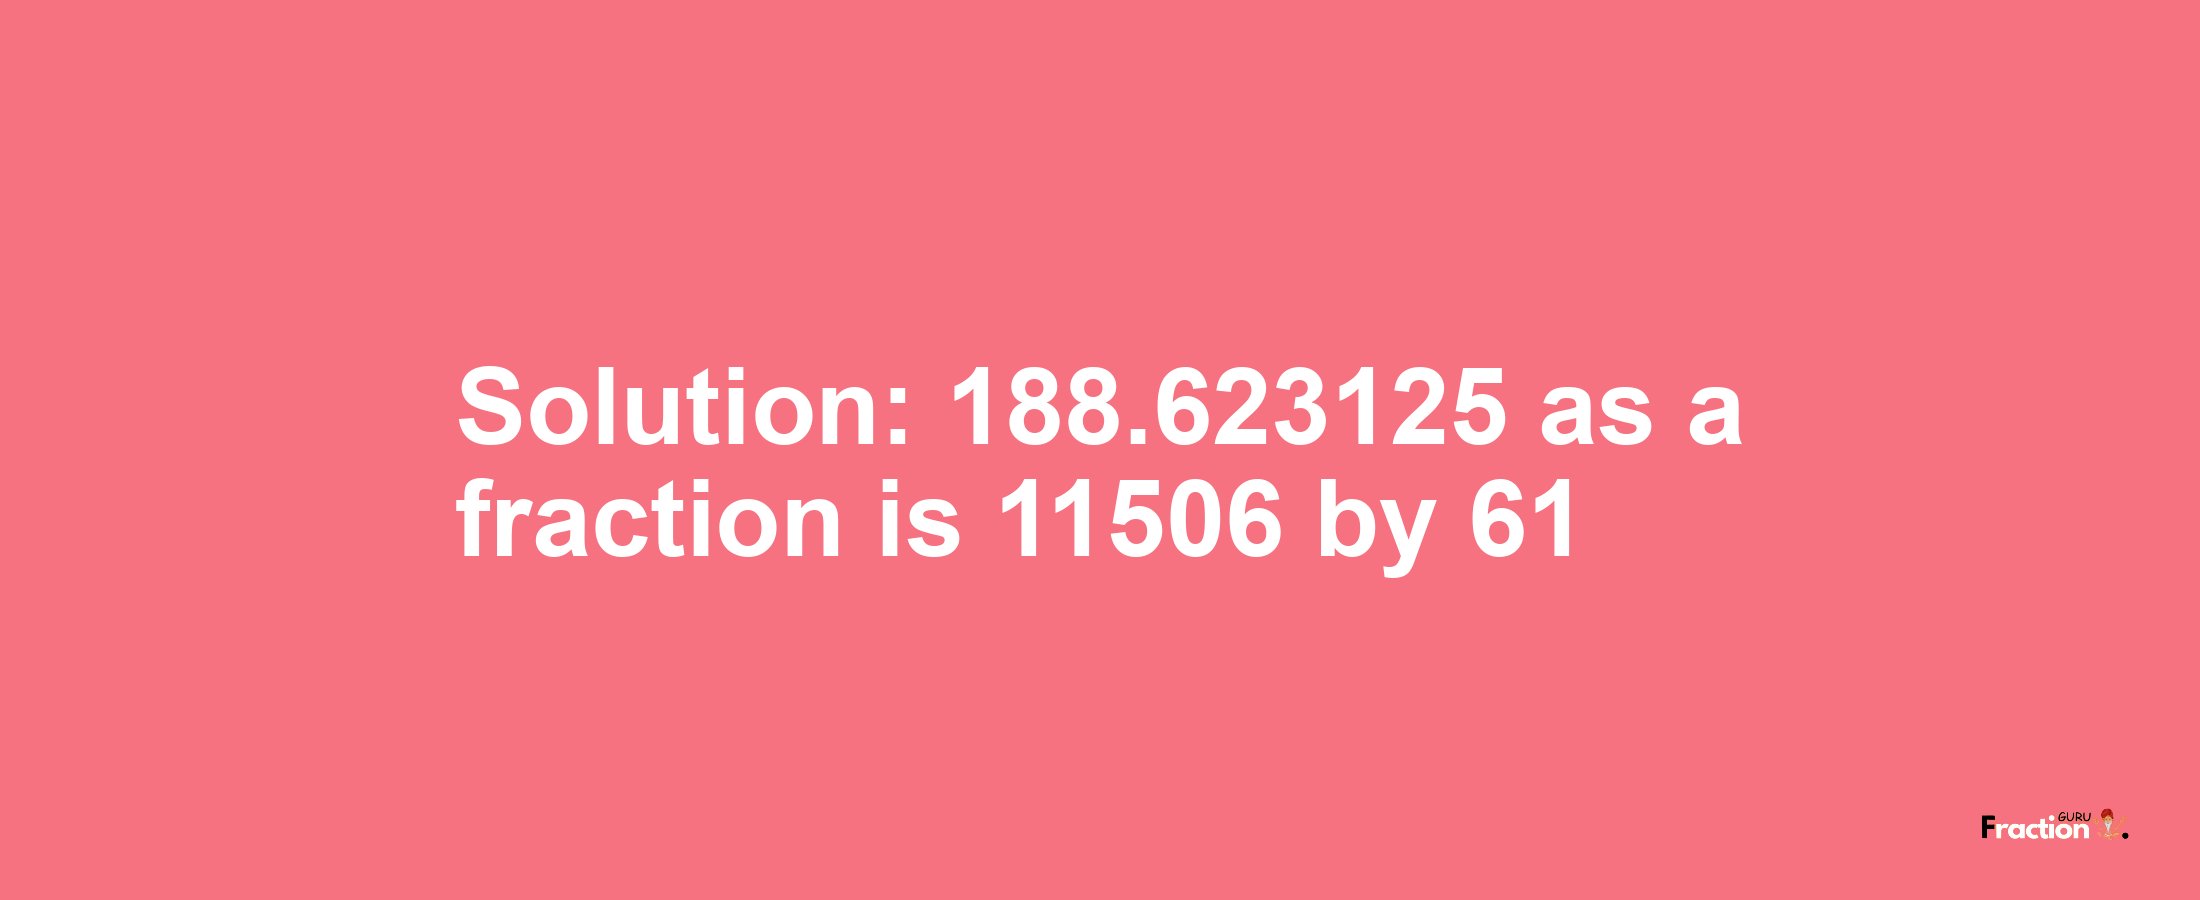 Solution:188.623125 as a fraction is 11506/61